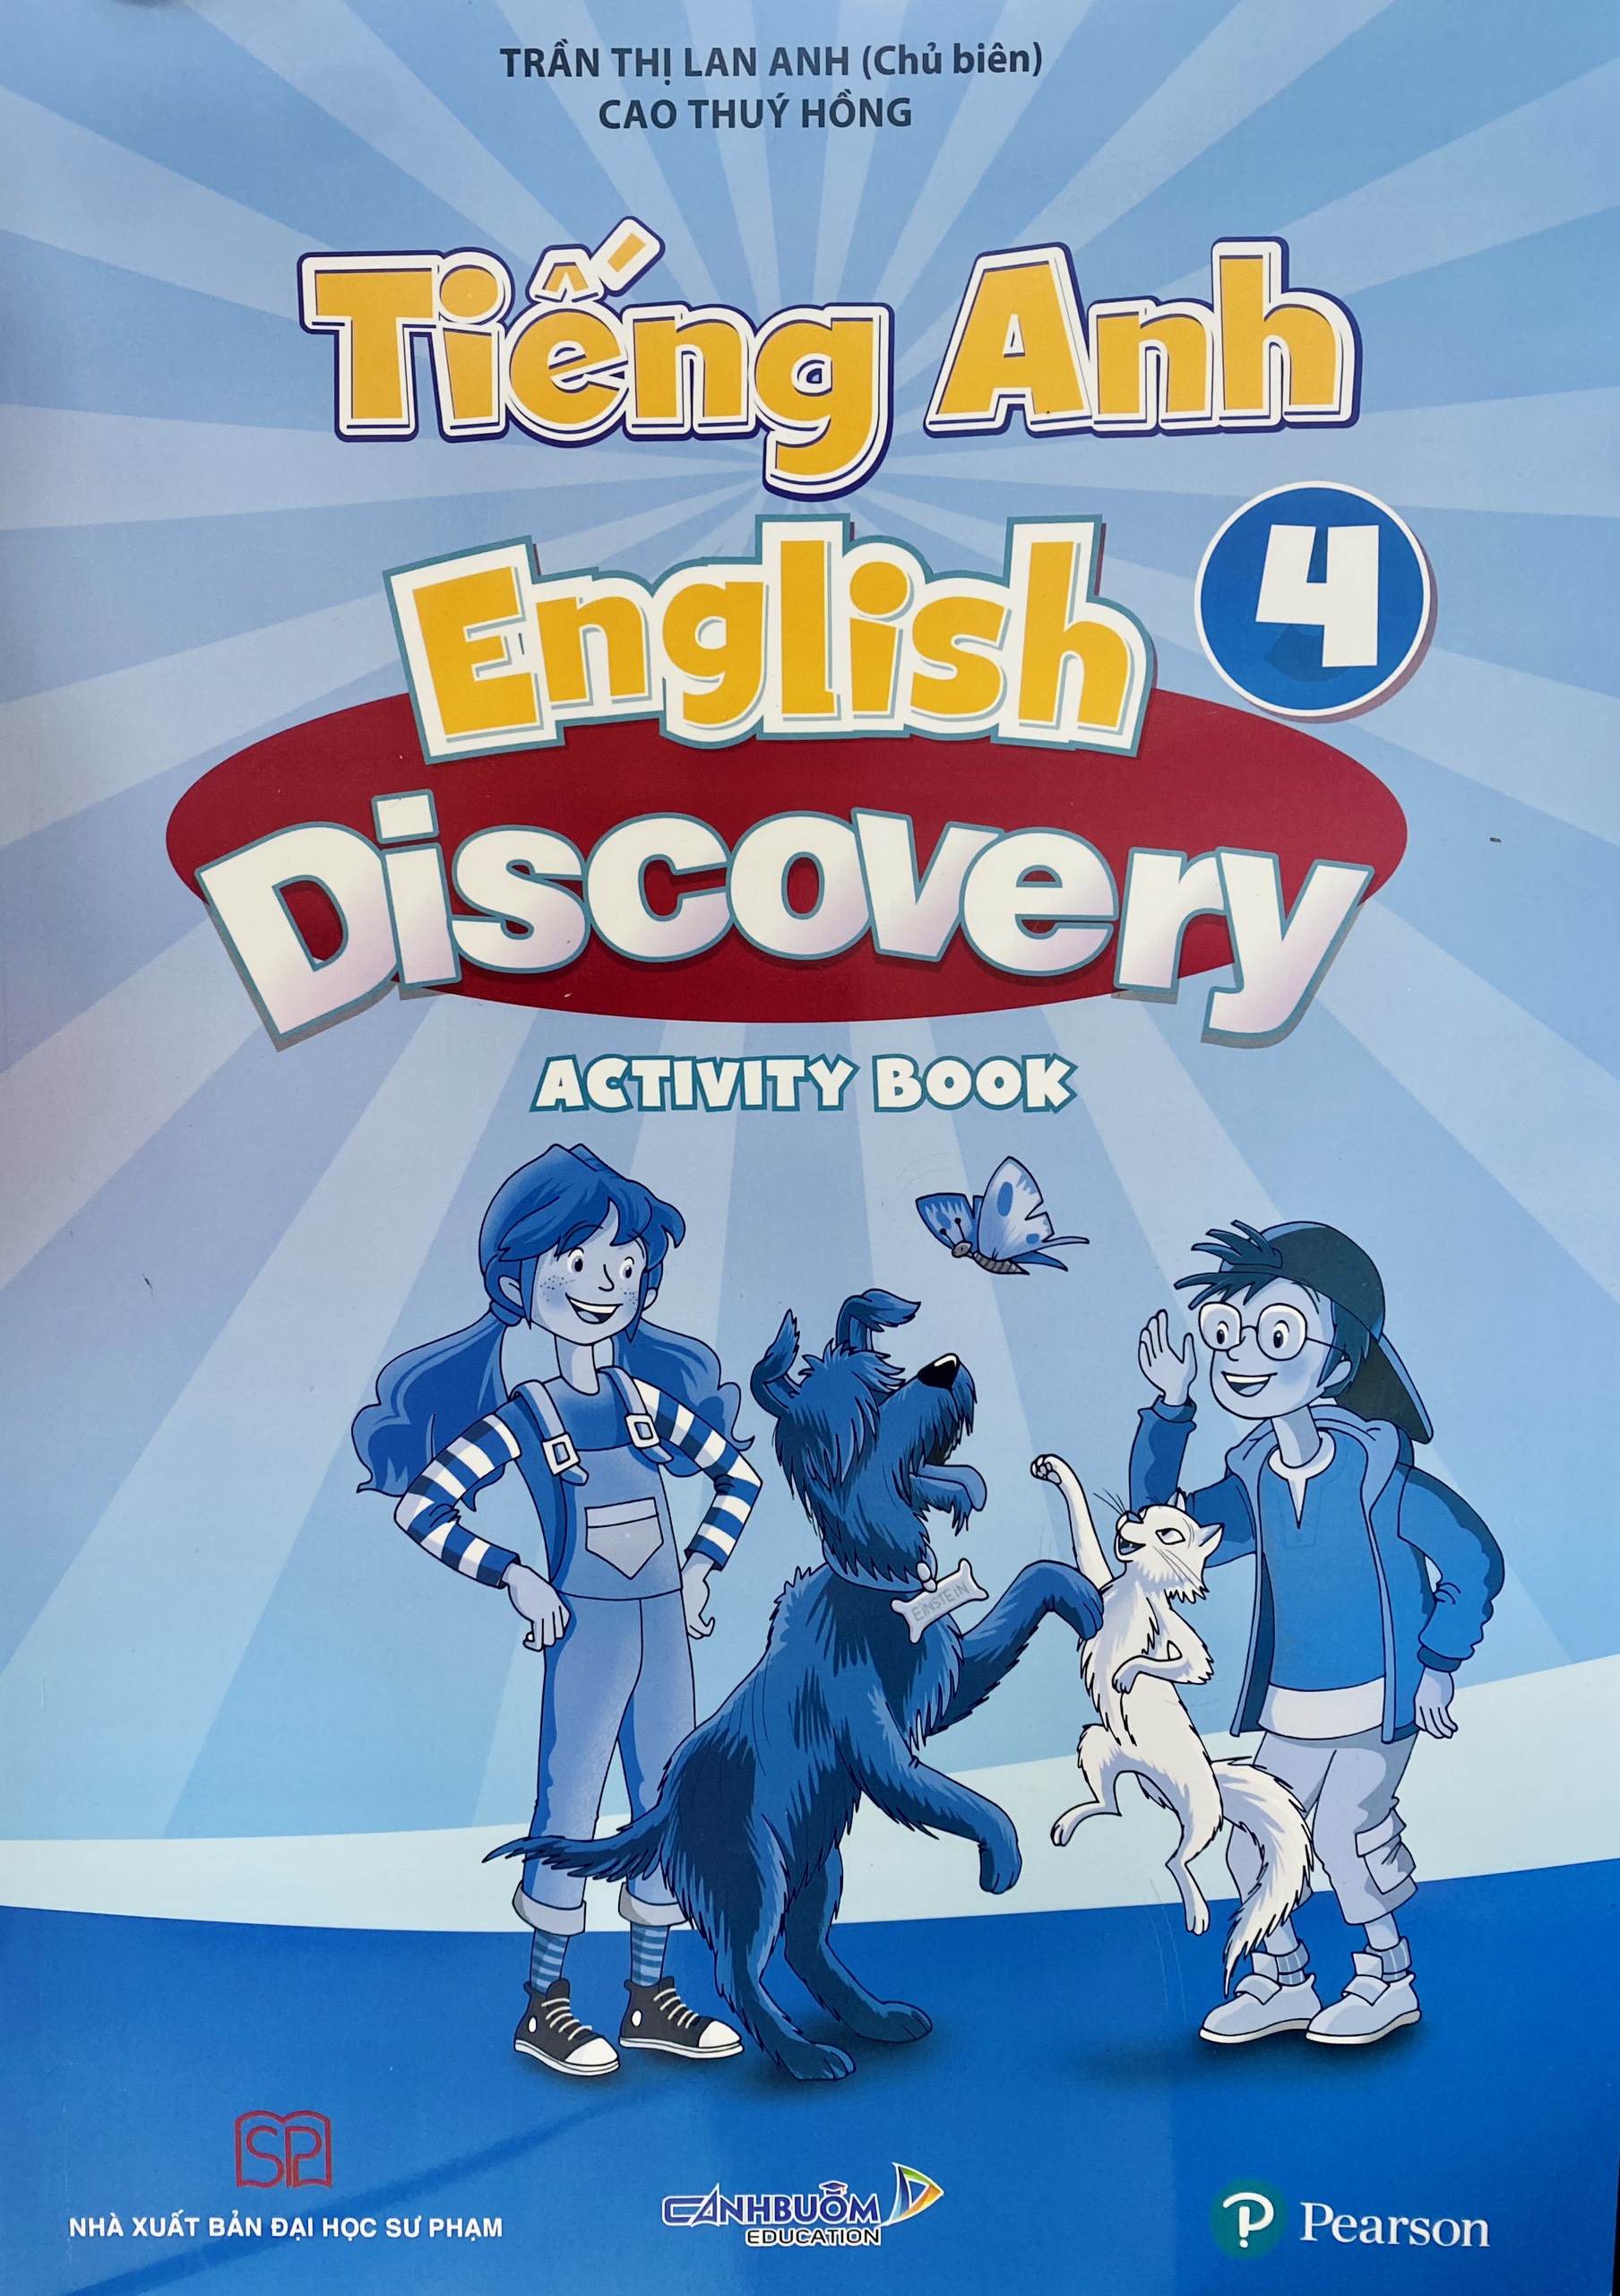 Tiếng Anh lớp 4 Discovery (Pupil's book+Activity book)